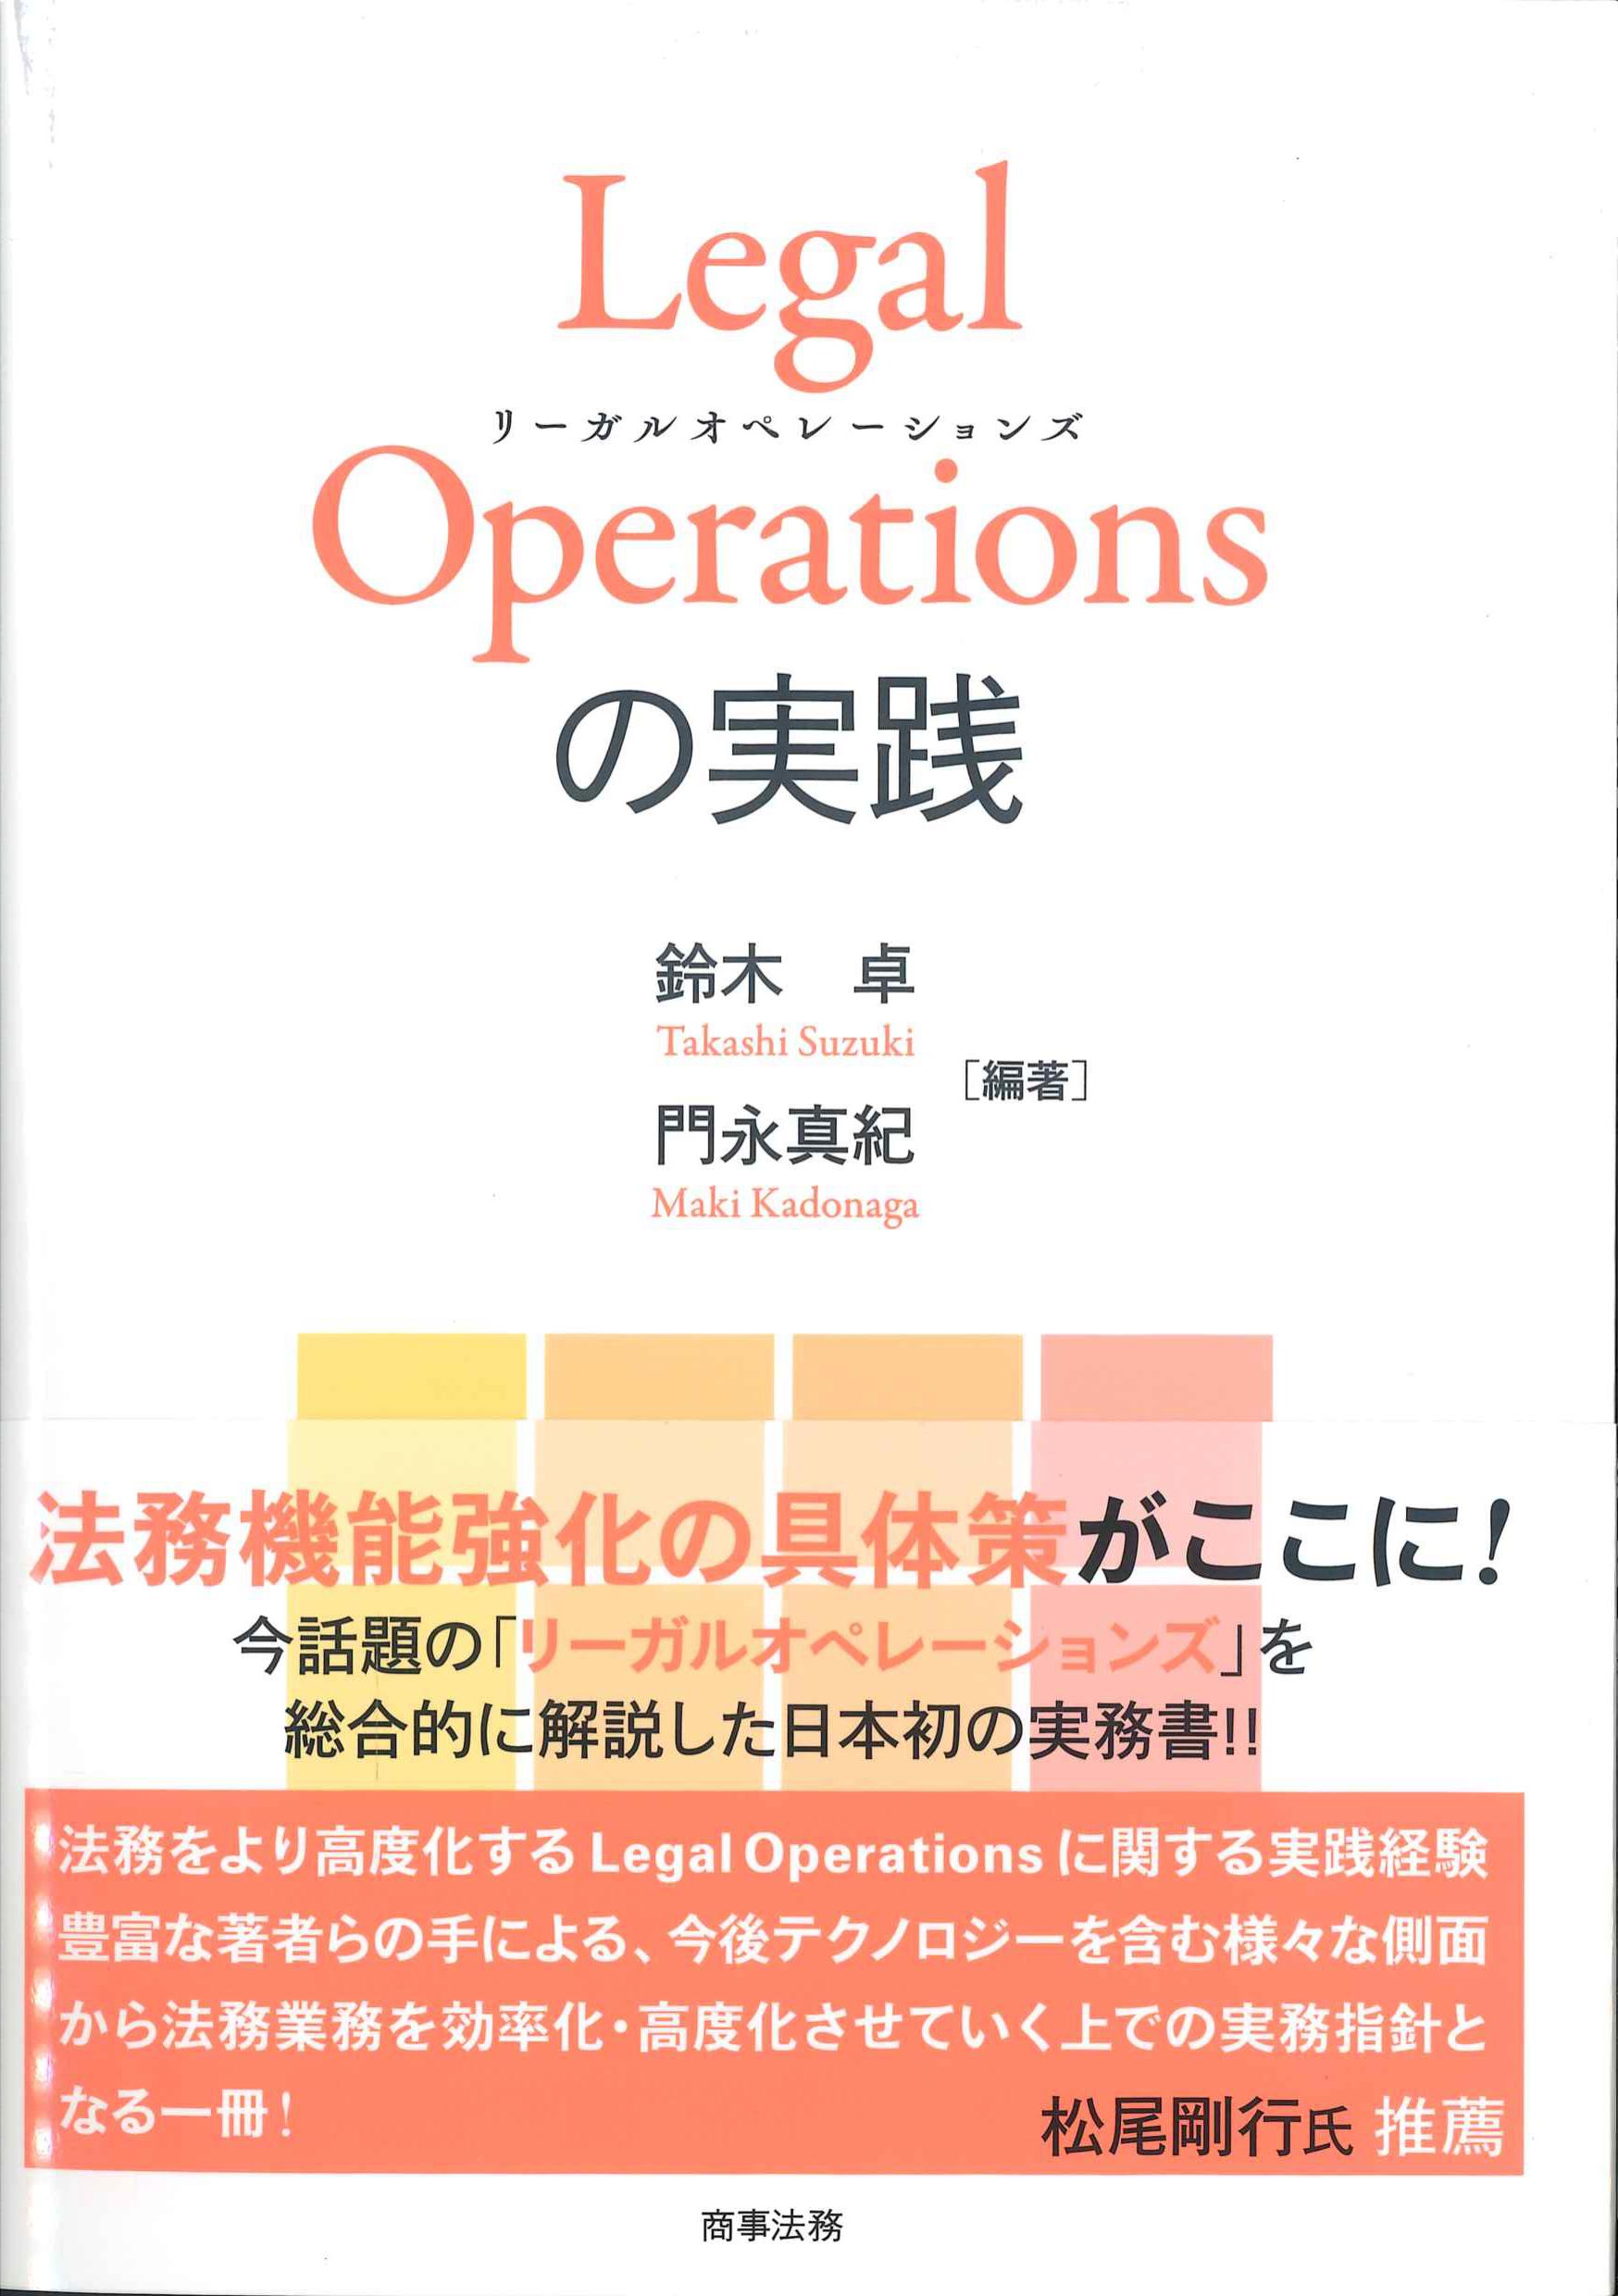 Legal Operationsの実践